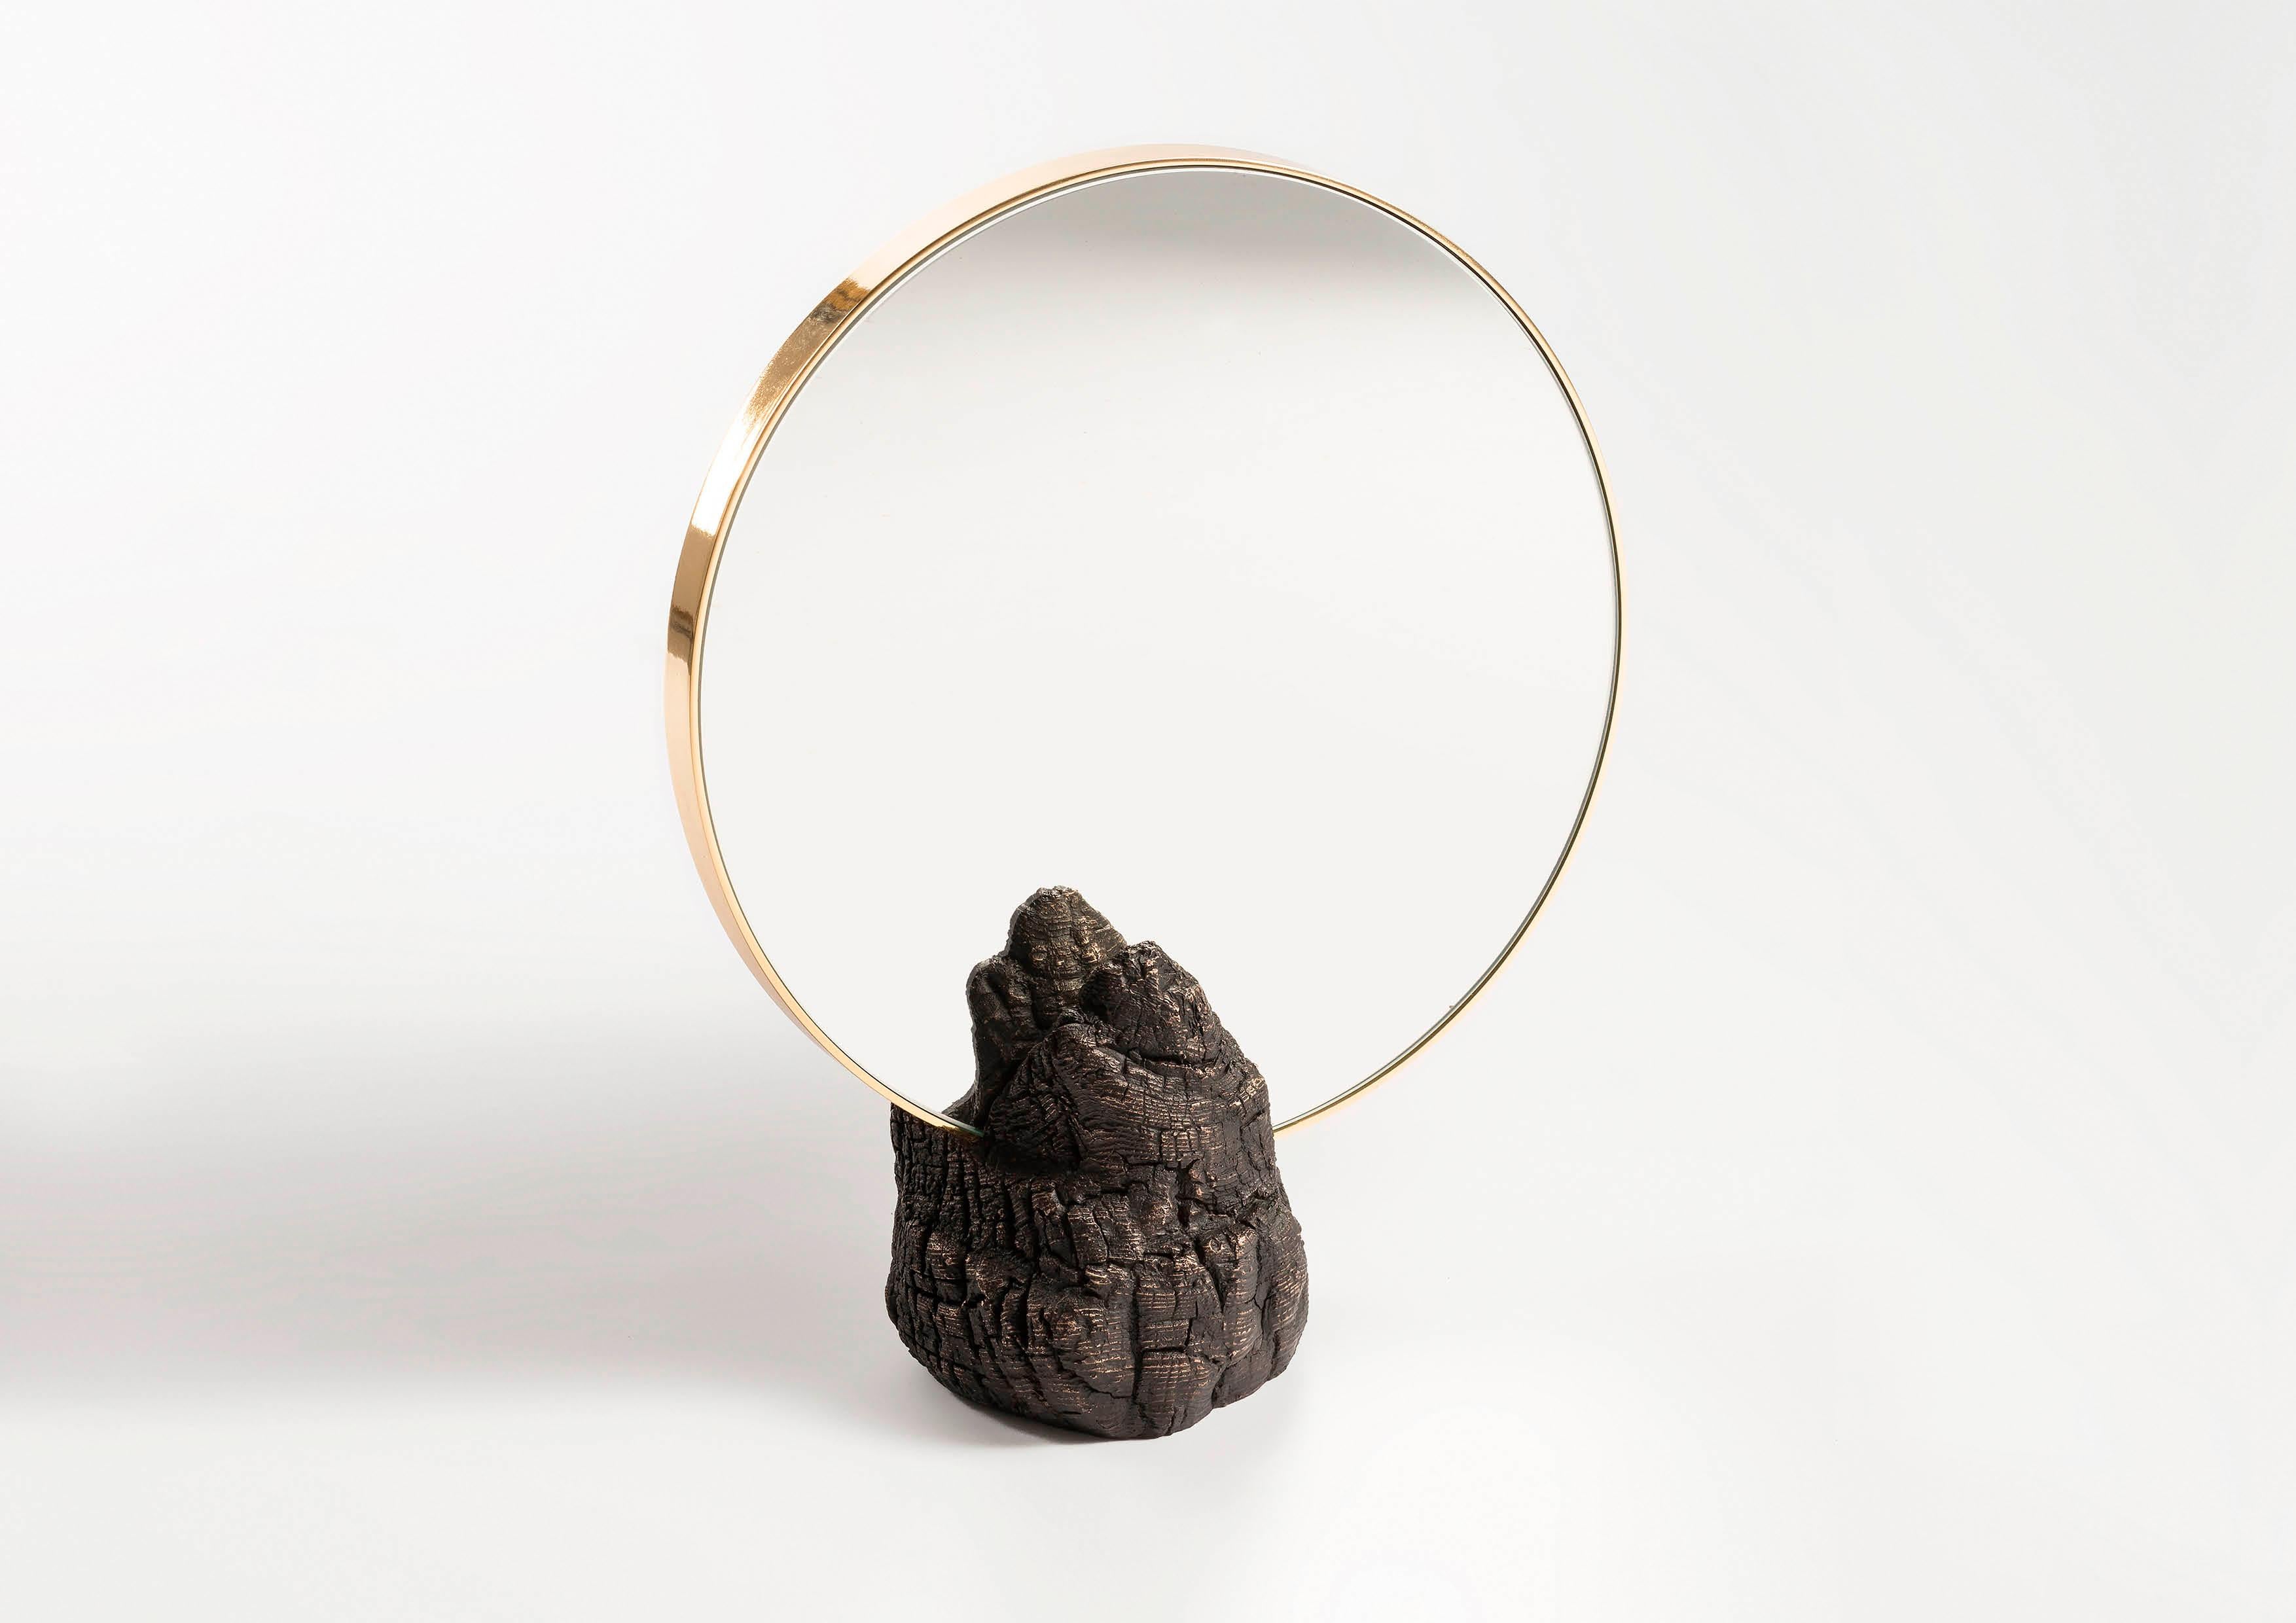 Roberto Sironi has sought out the remains of trees that have been burned by fire, trunks hit by lightning, charred branches salvaged from the mountains. With the ancient technique of bronze casting, Roberto has transformed them in objects of